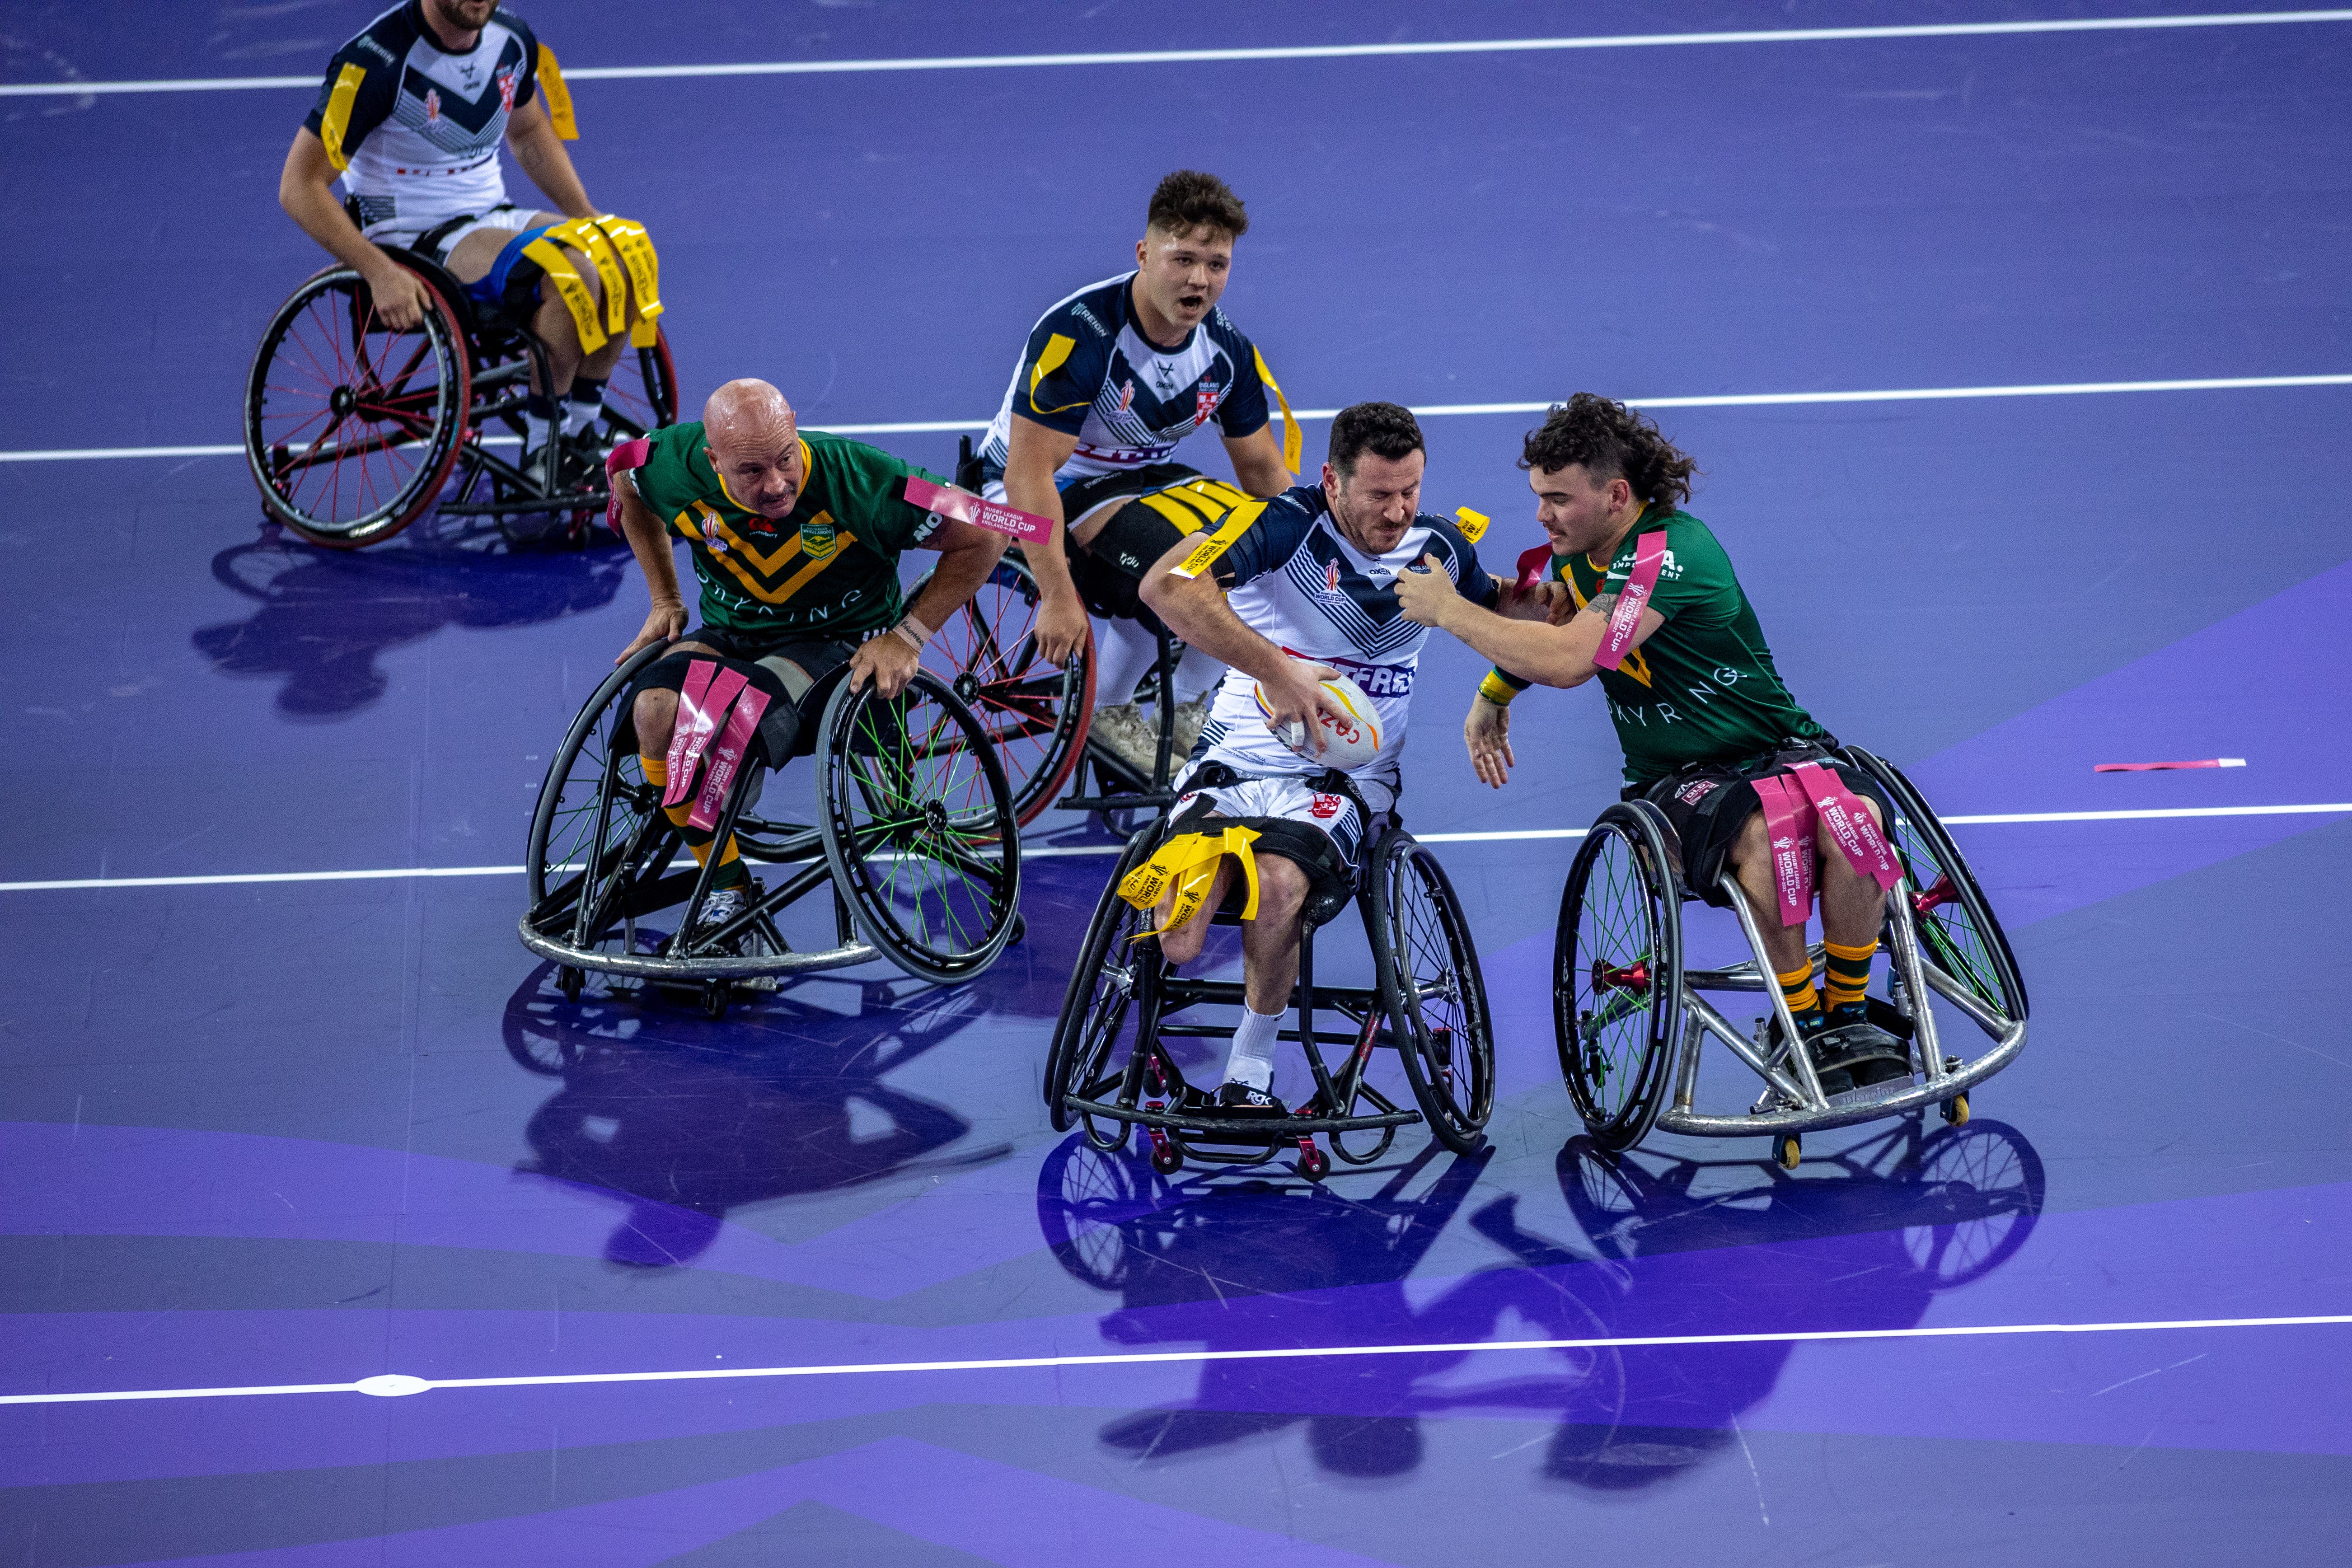 England beat Australia 38-8 in their opening match of the Wheelchair Rugby League World Cup (Steven Paston/PA)